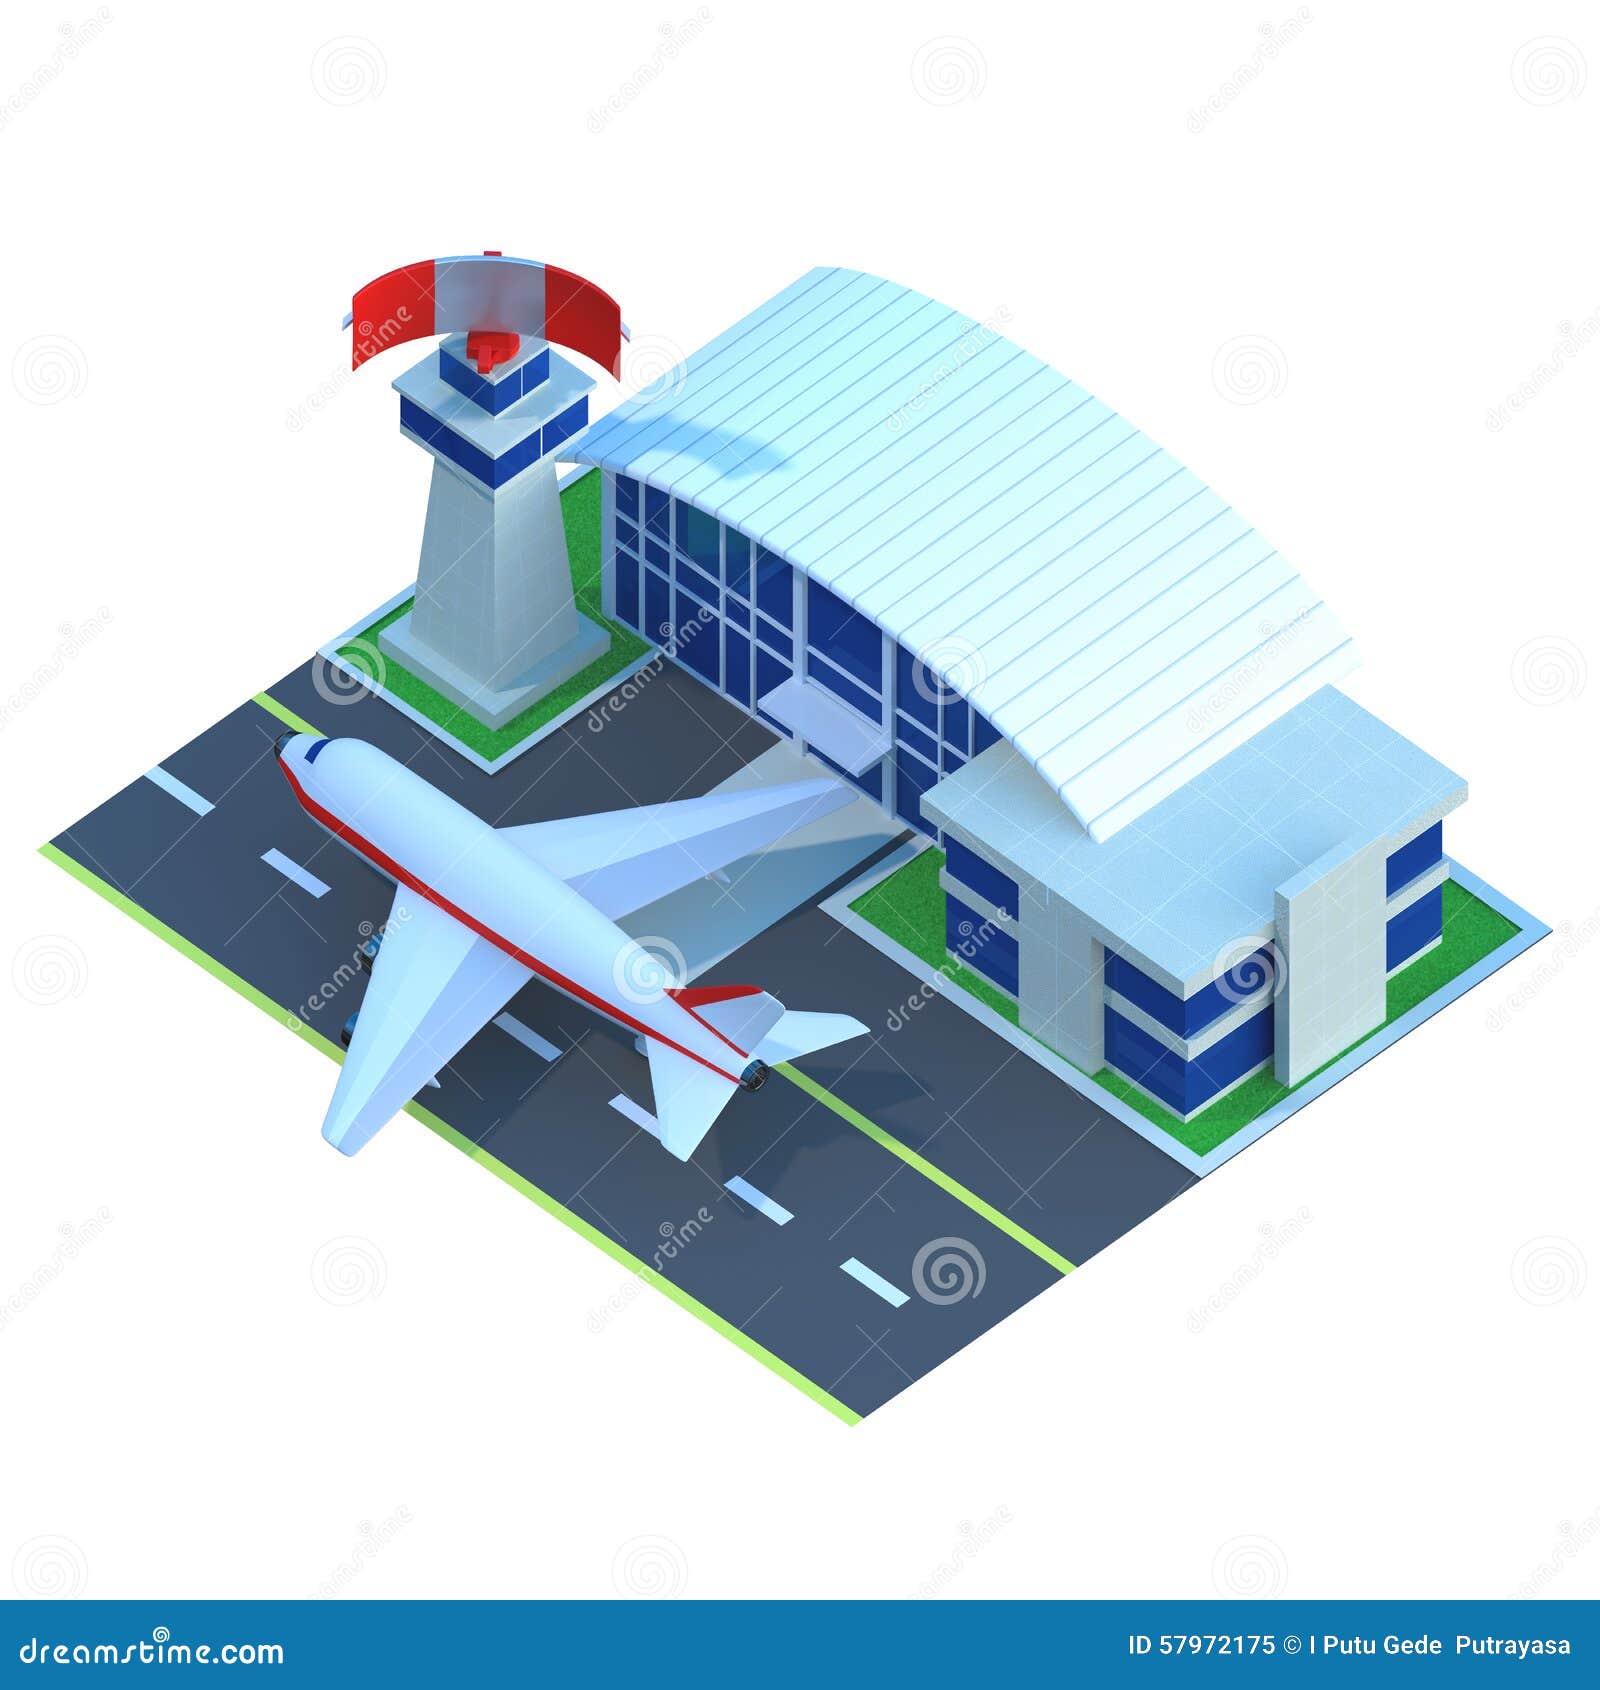 airport building clipart - photo #23